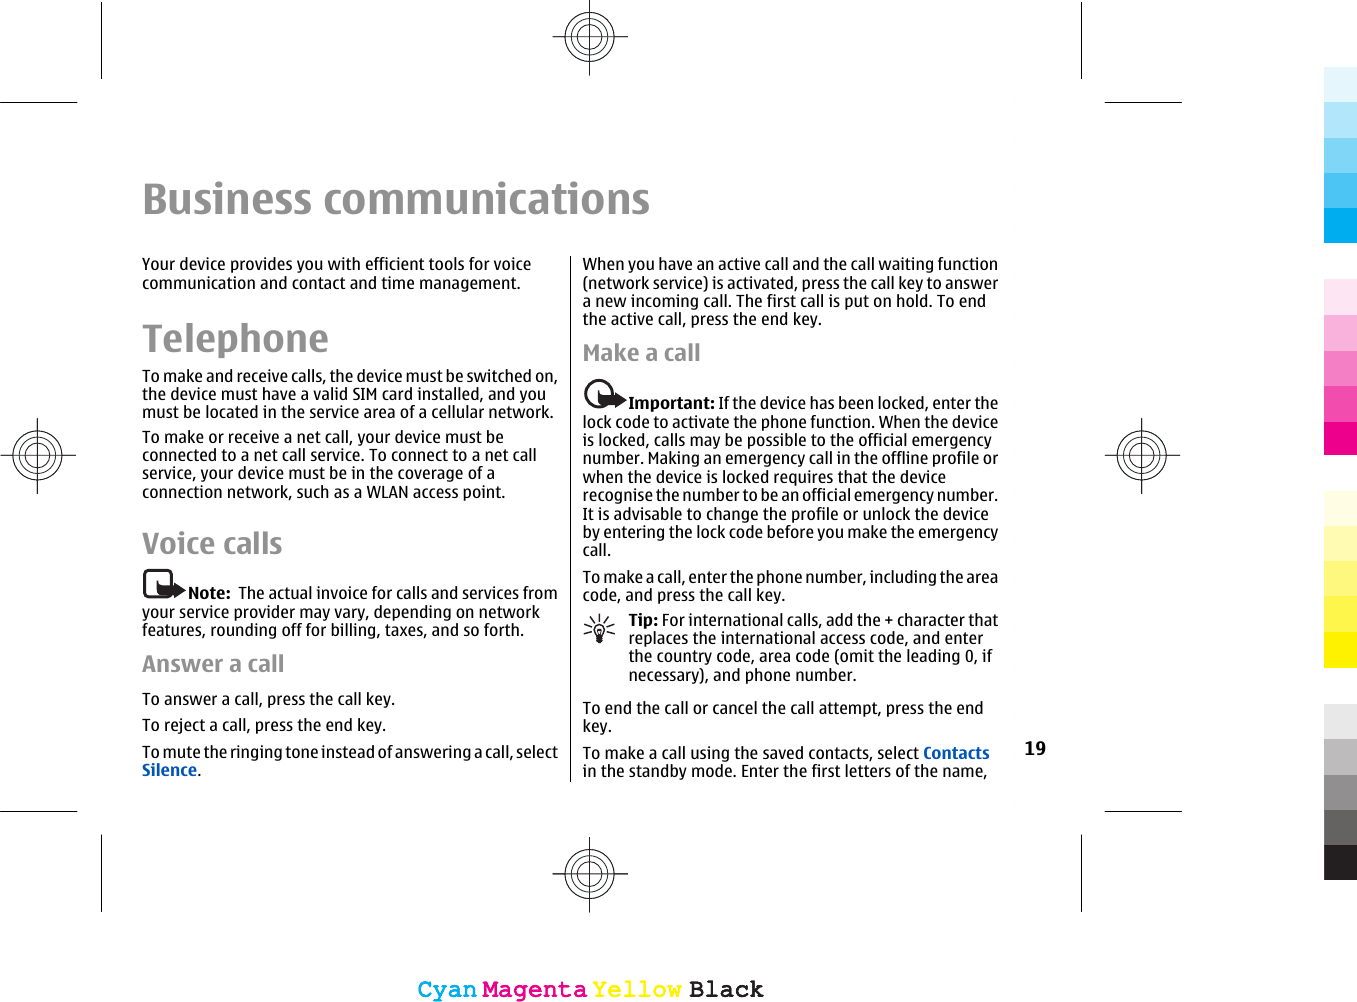 Business communicationsYour device provides you with efficient tools for voicecommunication and contact and time management.TelephoneTo make and receive calls, the device must be switched on,the device must have a valid SIM card installed, and youmust be located in the service area of a cellular network.To make or receive a net call, your device must beconnected to a net call service. To connect to a net callservice, your device must be in the coverage of aconnection network, such as a WLAN access point.Voice callsNote:  The actual invoice for calls and services fromyour service provider may vary, depending on networkfeatures, rounding off for billing, taxes, and so forth.Answer a callTo answer a call, press the call key.To reject a call, press the end key.To mute the ringing tone instead of answering a call, selectSilence.When you have an active call and the call waiting function(network service) is activated, press the call key to answera new incoming call. The first call is put on hold. To endthe active call, press the end key.Make a callImportant: If the device has been locked, enter thelock code to activate the phone function. When the deviceis locked, calls may be possible to the official emergencynumber. Making an emergency call in the offline profile orwhen the device is locked requires that the devicerecognise the number to be an official emergency number.It is advisable to change the profile or unlock the deviceby entering the lock code before you make the emergencycall.To make a call, enter the phone number, including the areacode, and press the call key.Tip: For international calls, add the + character thatreplaces the international access code, and enterthe country code, area code (omit the leading 0, ifnecessary), and phone number.To end the call or cancel the call attempt, press the endkey.To make a call using the saved contacts, select Contactsin the standby mode. Enter the first letters of the name,19CyanCyanMagentaMagentaYellowYellowBlackBlackCyanCyanMagentaMagentaYellowYellowBlackBlack